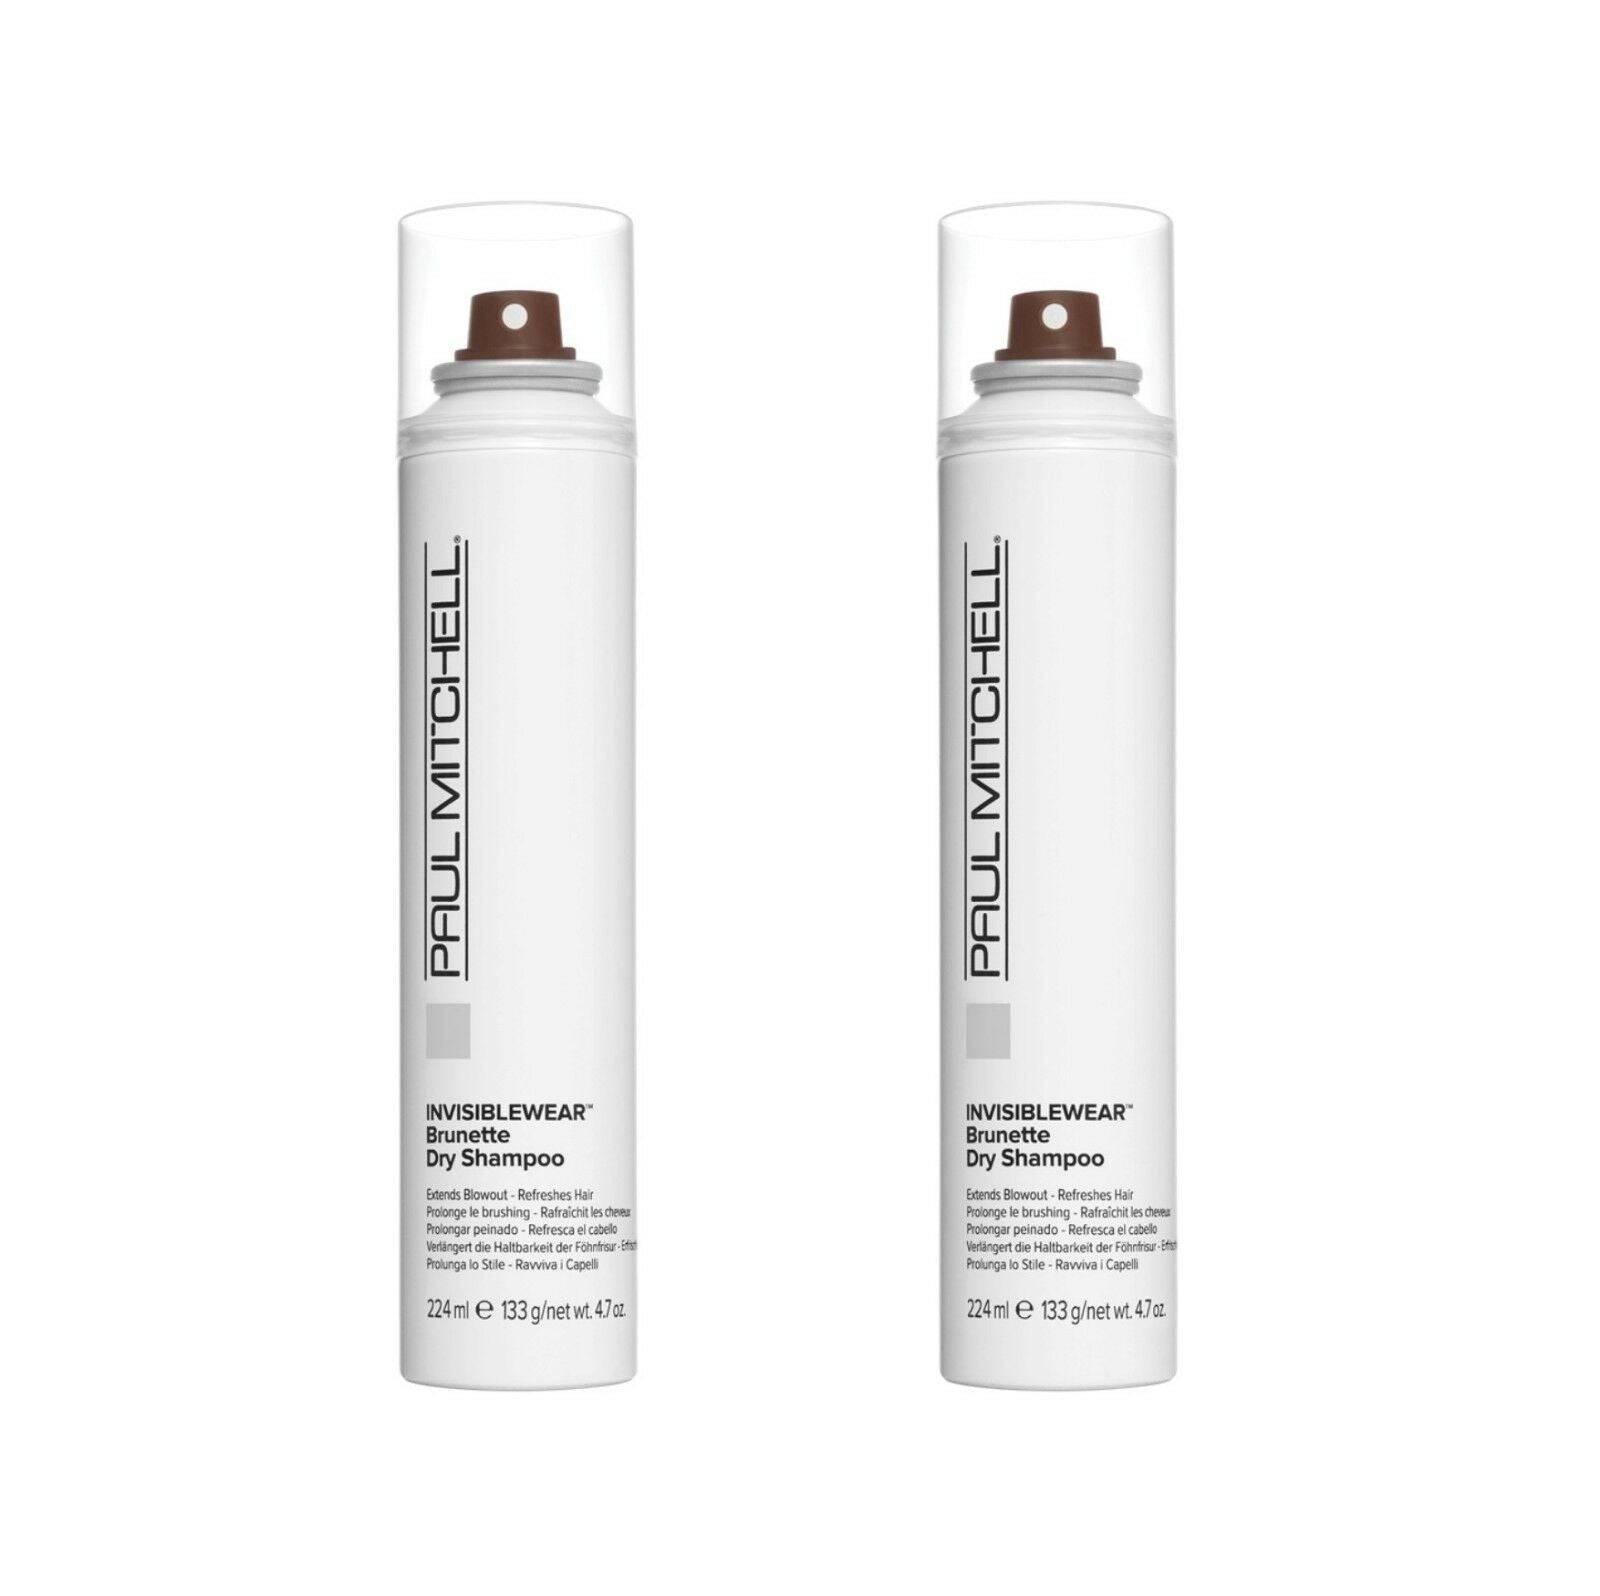 Paul Mitchell Invisiblewear Brunette Dry Shampoo Extends Blowout 224ml x 2 - On Line Hair Depot